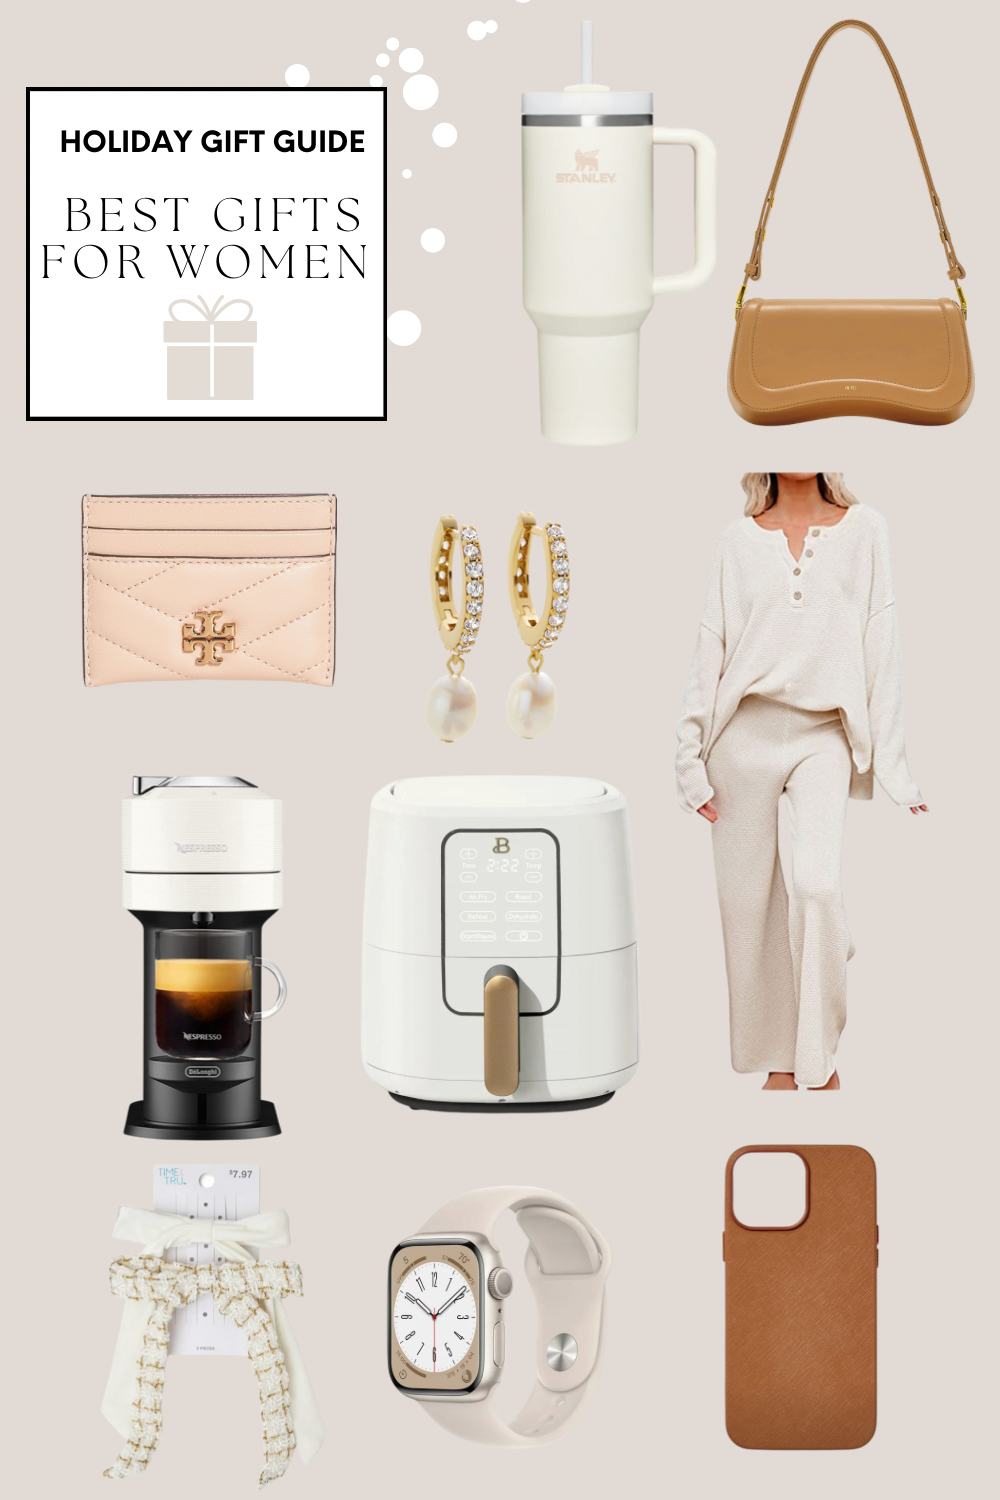 The 50 Best Gifts for Every Woman in Your Life